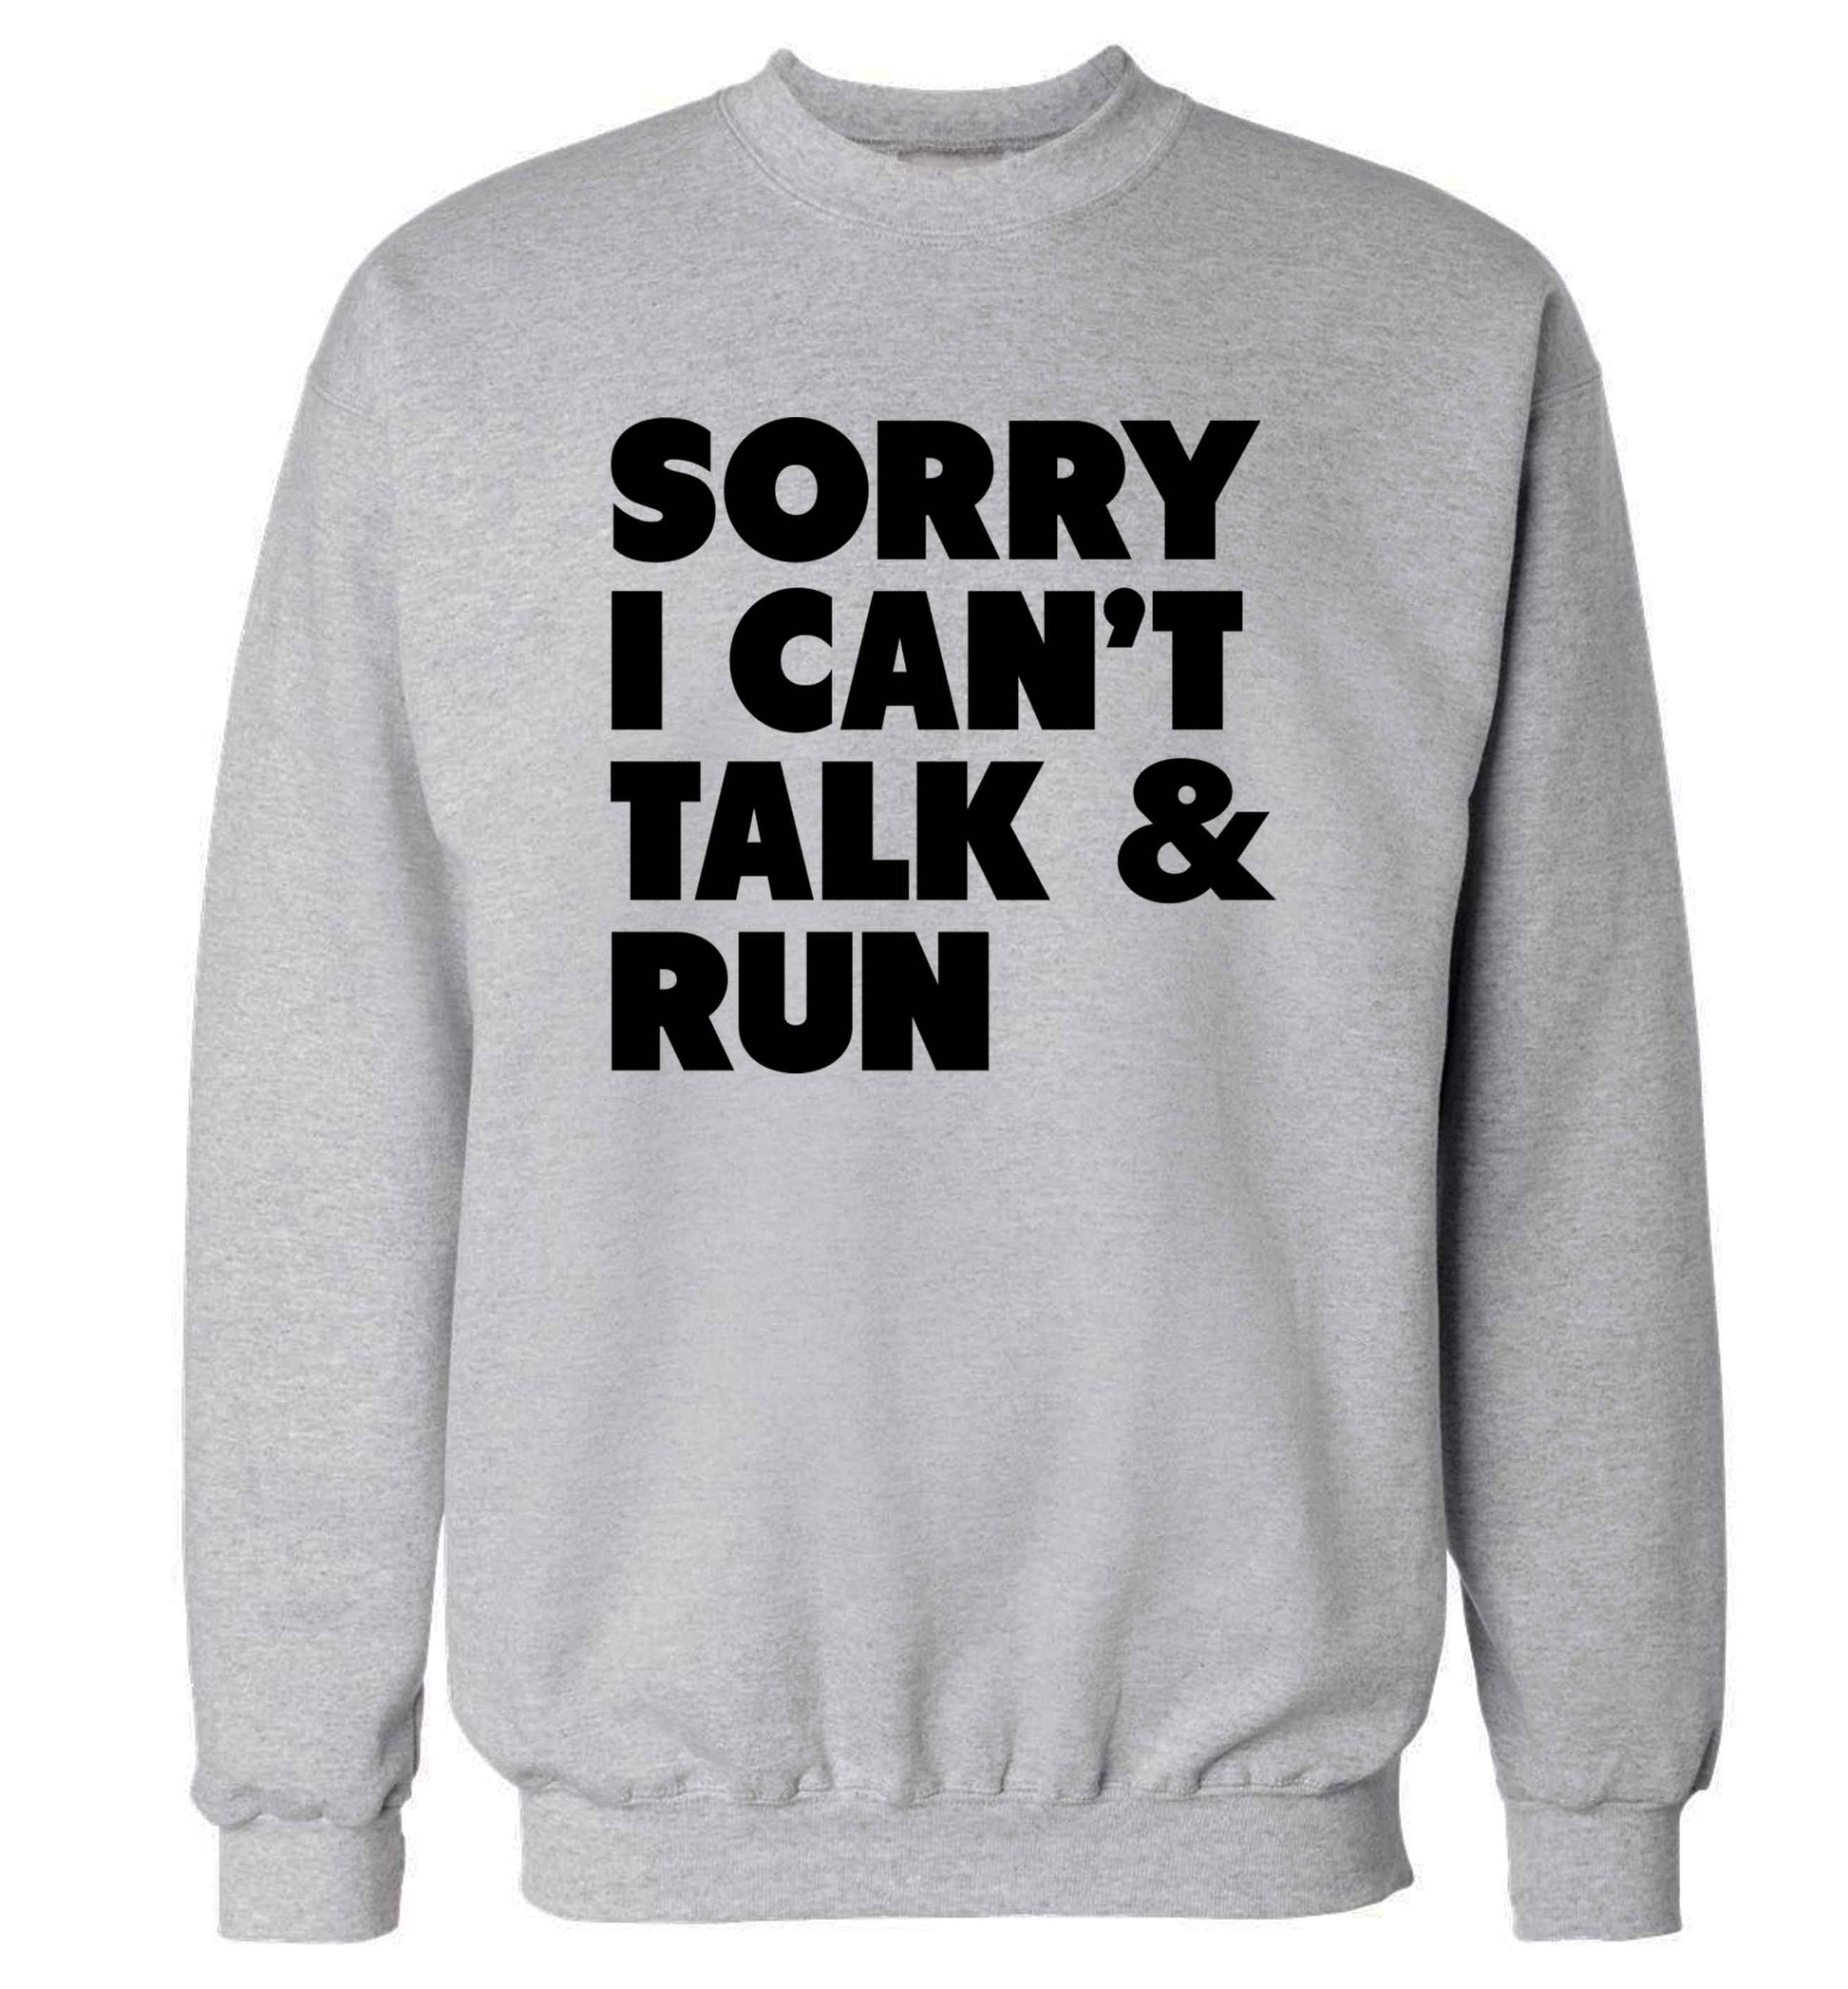 Sorry I can't talk and run adult's unisex grey sweater 2XL